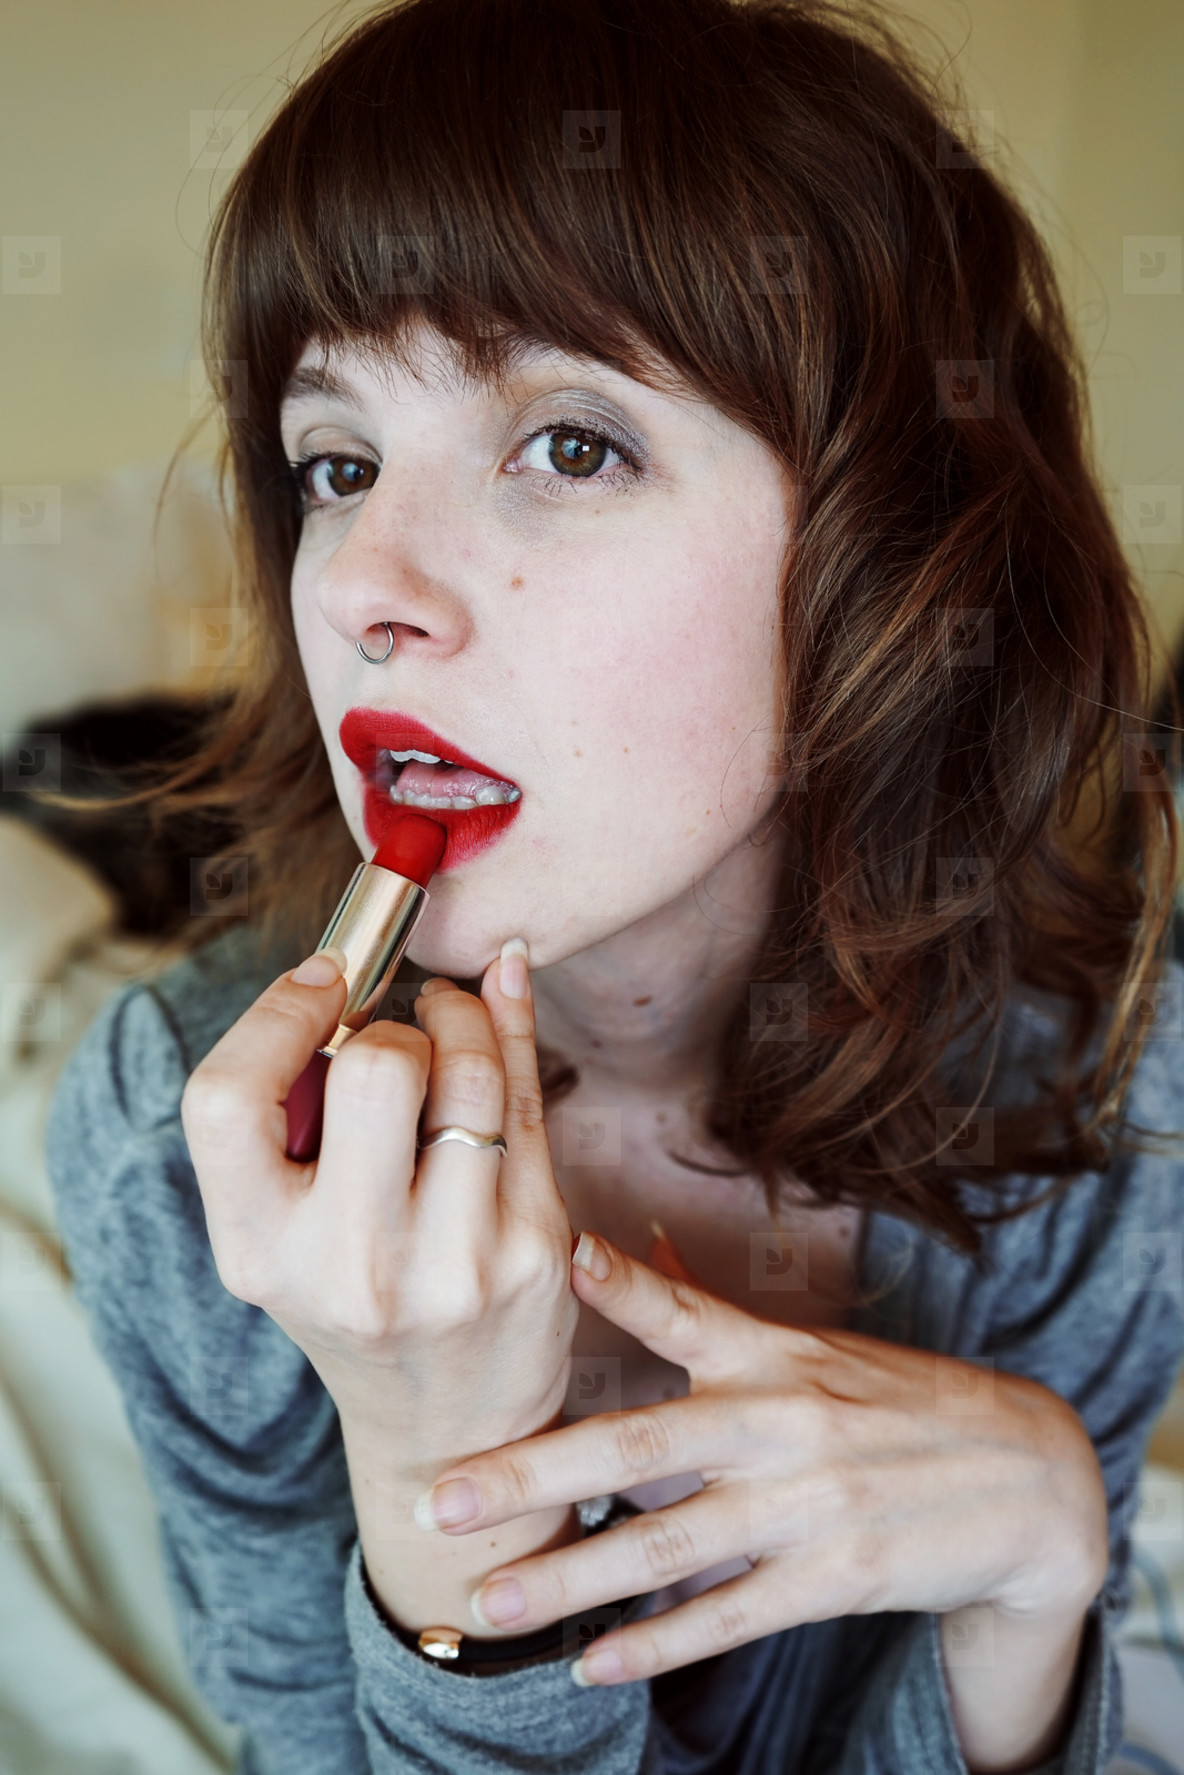 Photos - Young woman painting her lips - YouWorkForThem